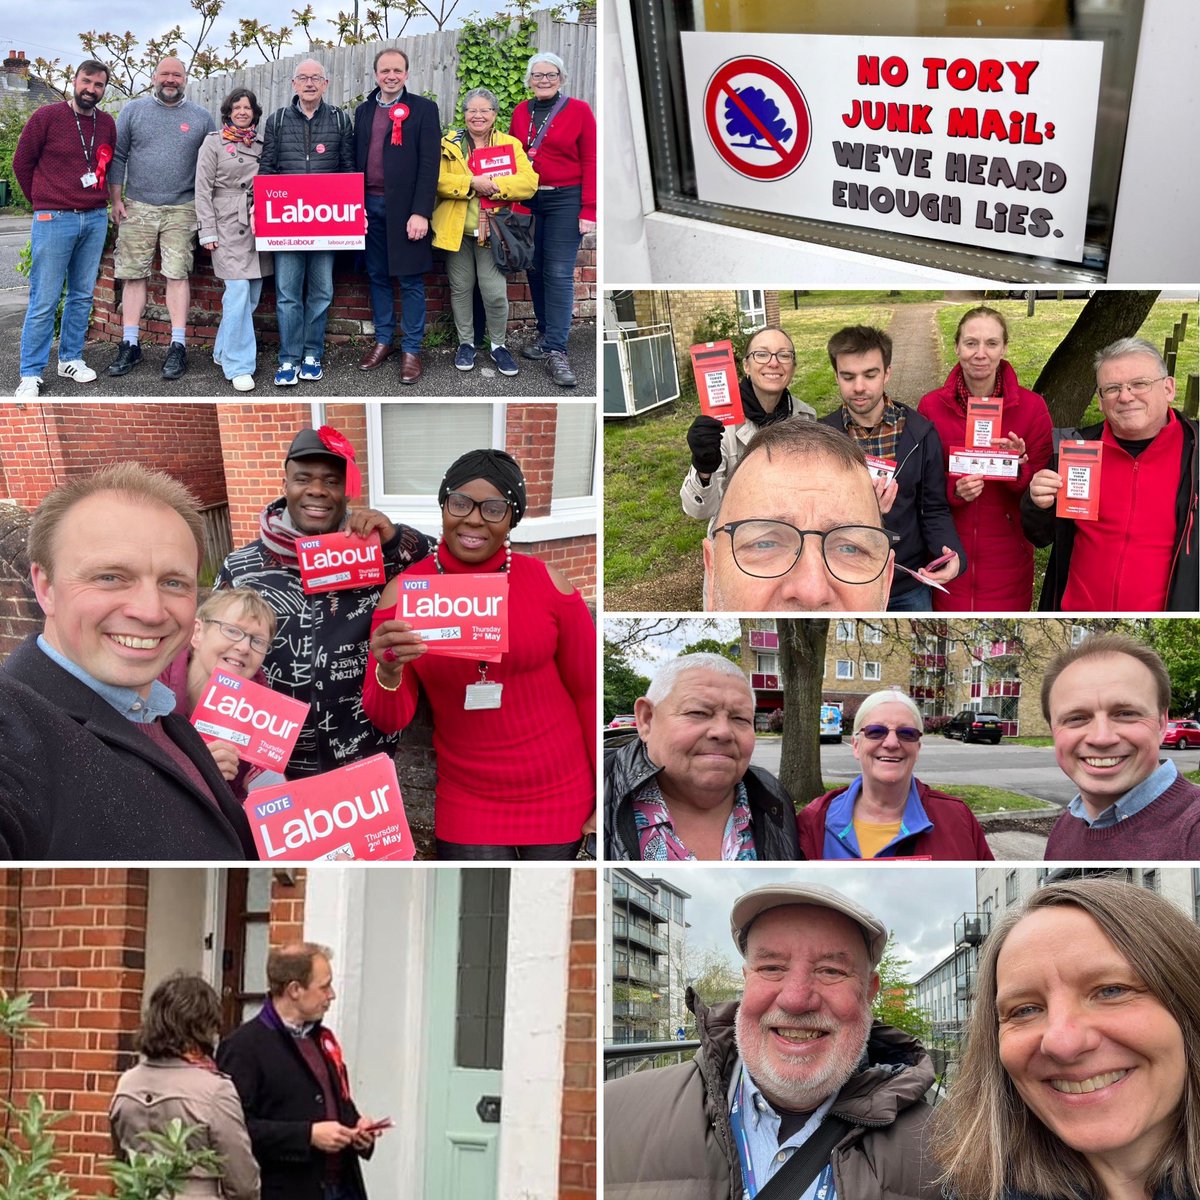 We had teams out across Southampton Itchen reminding people about the hardworking @UKLabour council candidates they can vote for on 2nd May. Even a Tory MP said his party is “no longer focused on public services” running councils, NHS, police & schools into the ground. Enough!